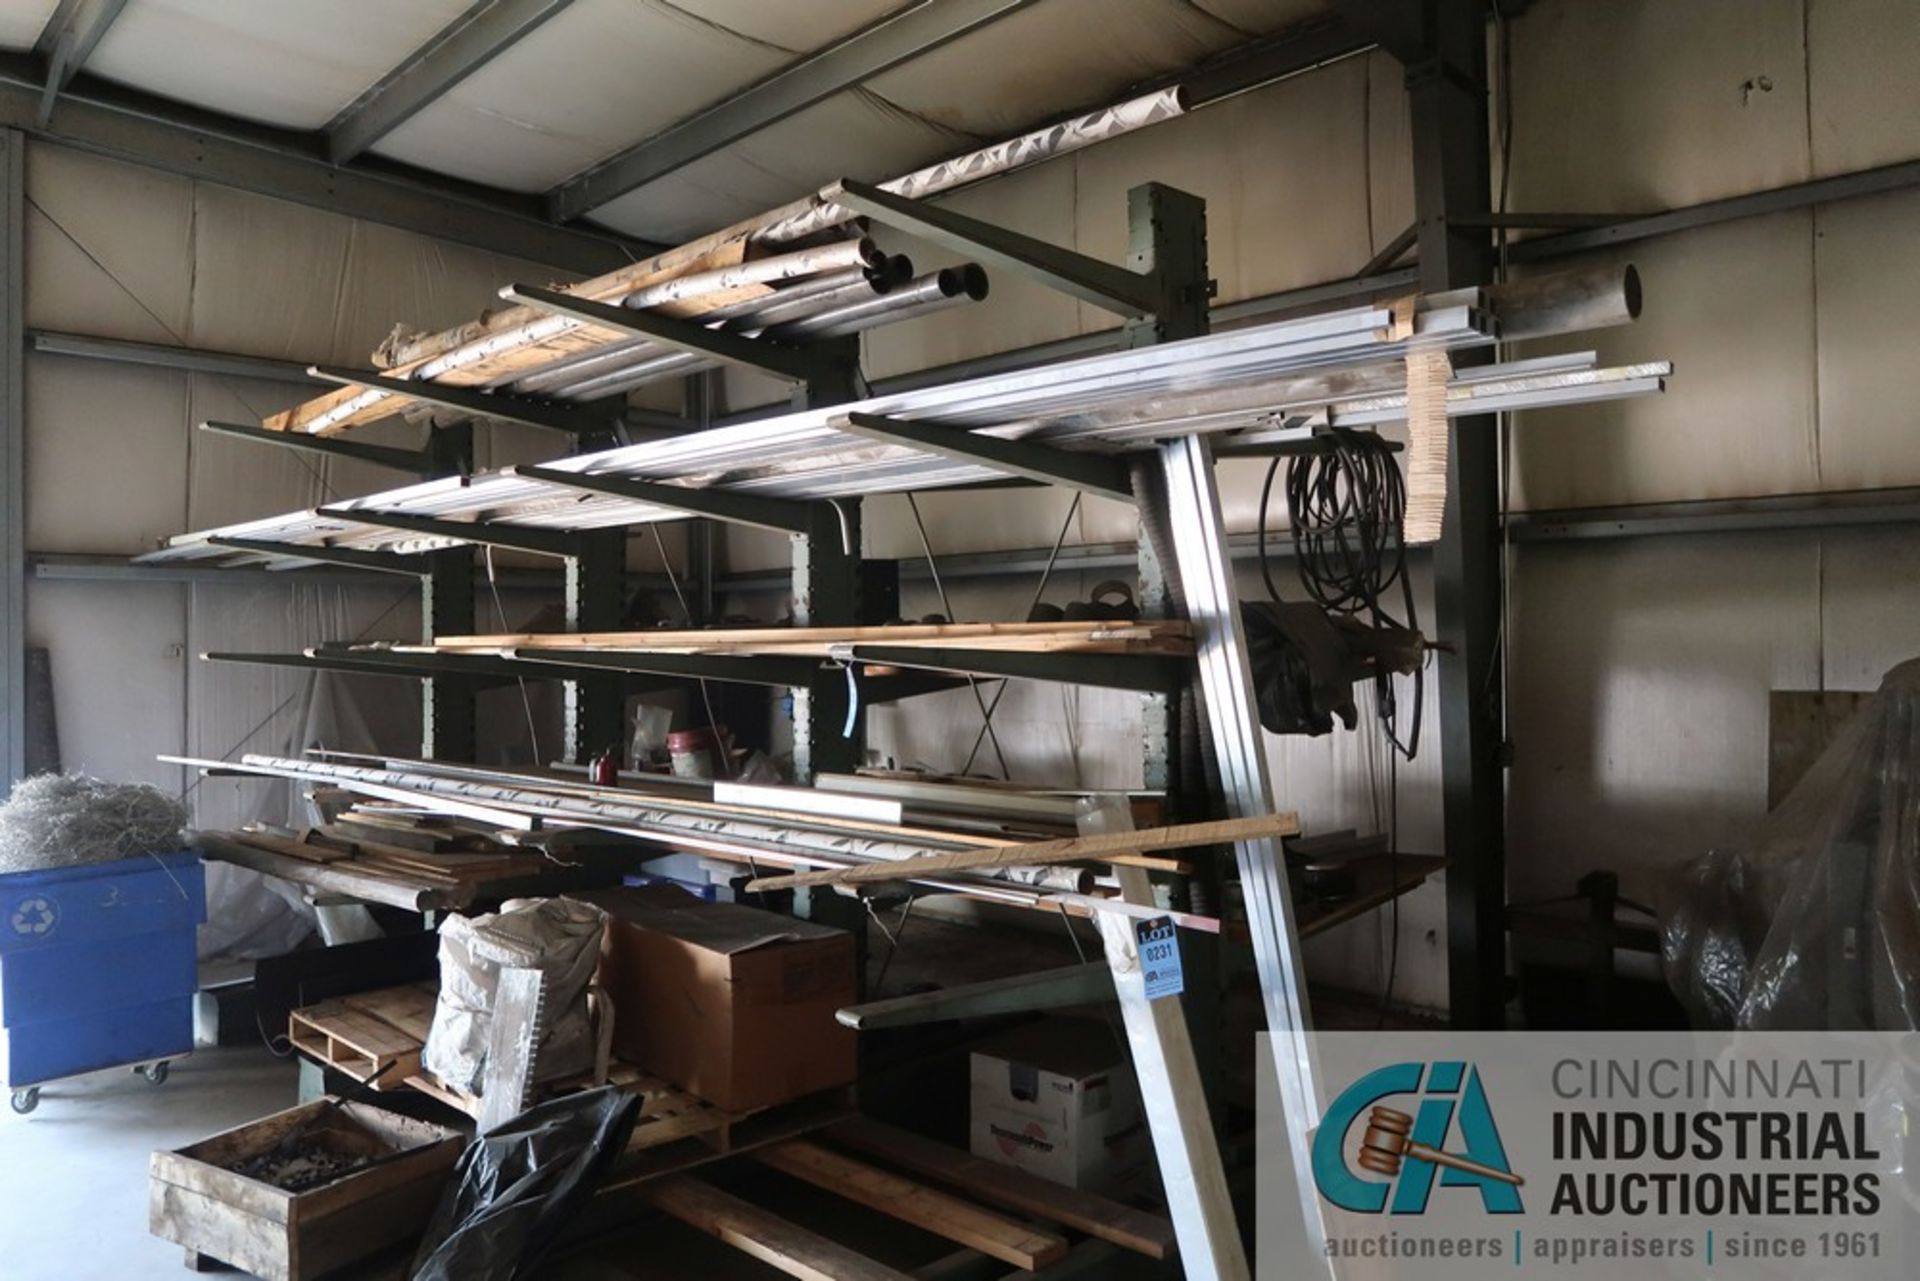 (LOT) CONTENTS OF CANTILEVER RACK INCLUDING ALUMINUM STOCK